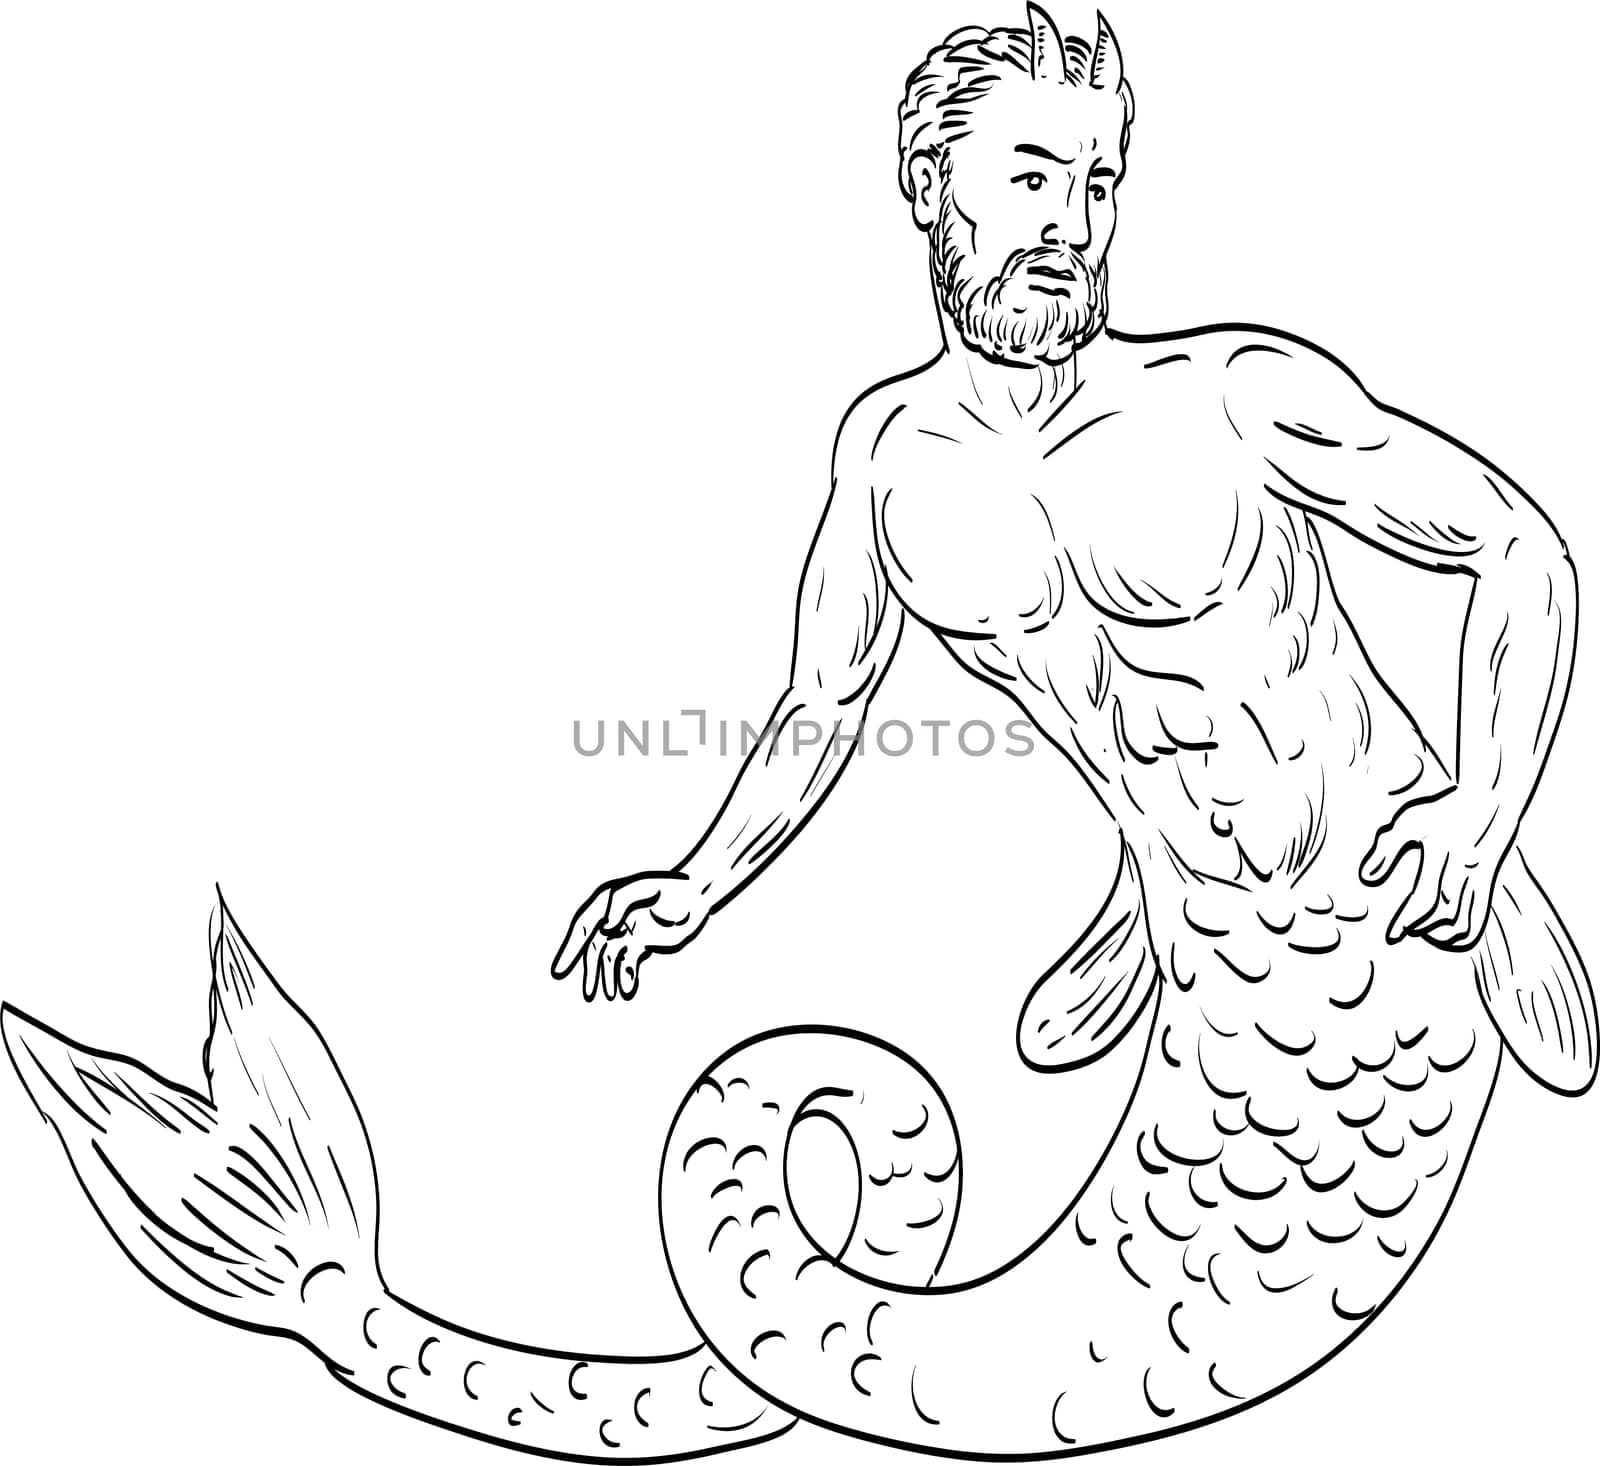 Line art drawing illustration of a Merman, the male counterparts of the mythical female mermaid done in medieval style on isolated background in black and white.